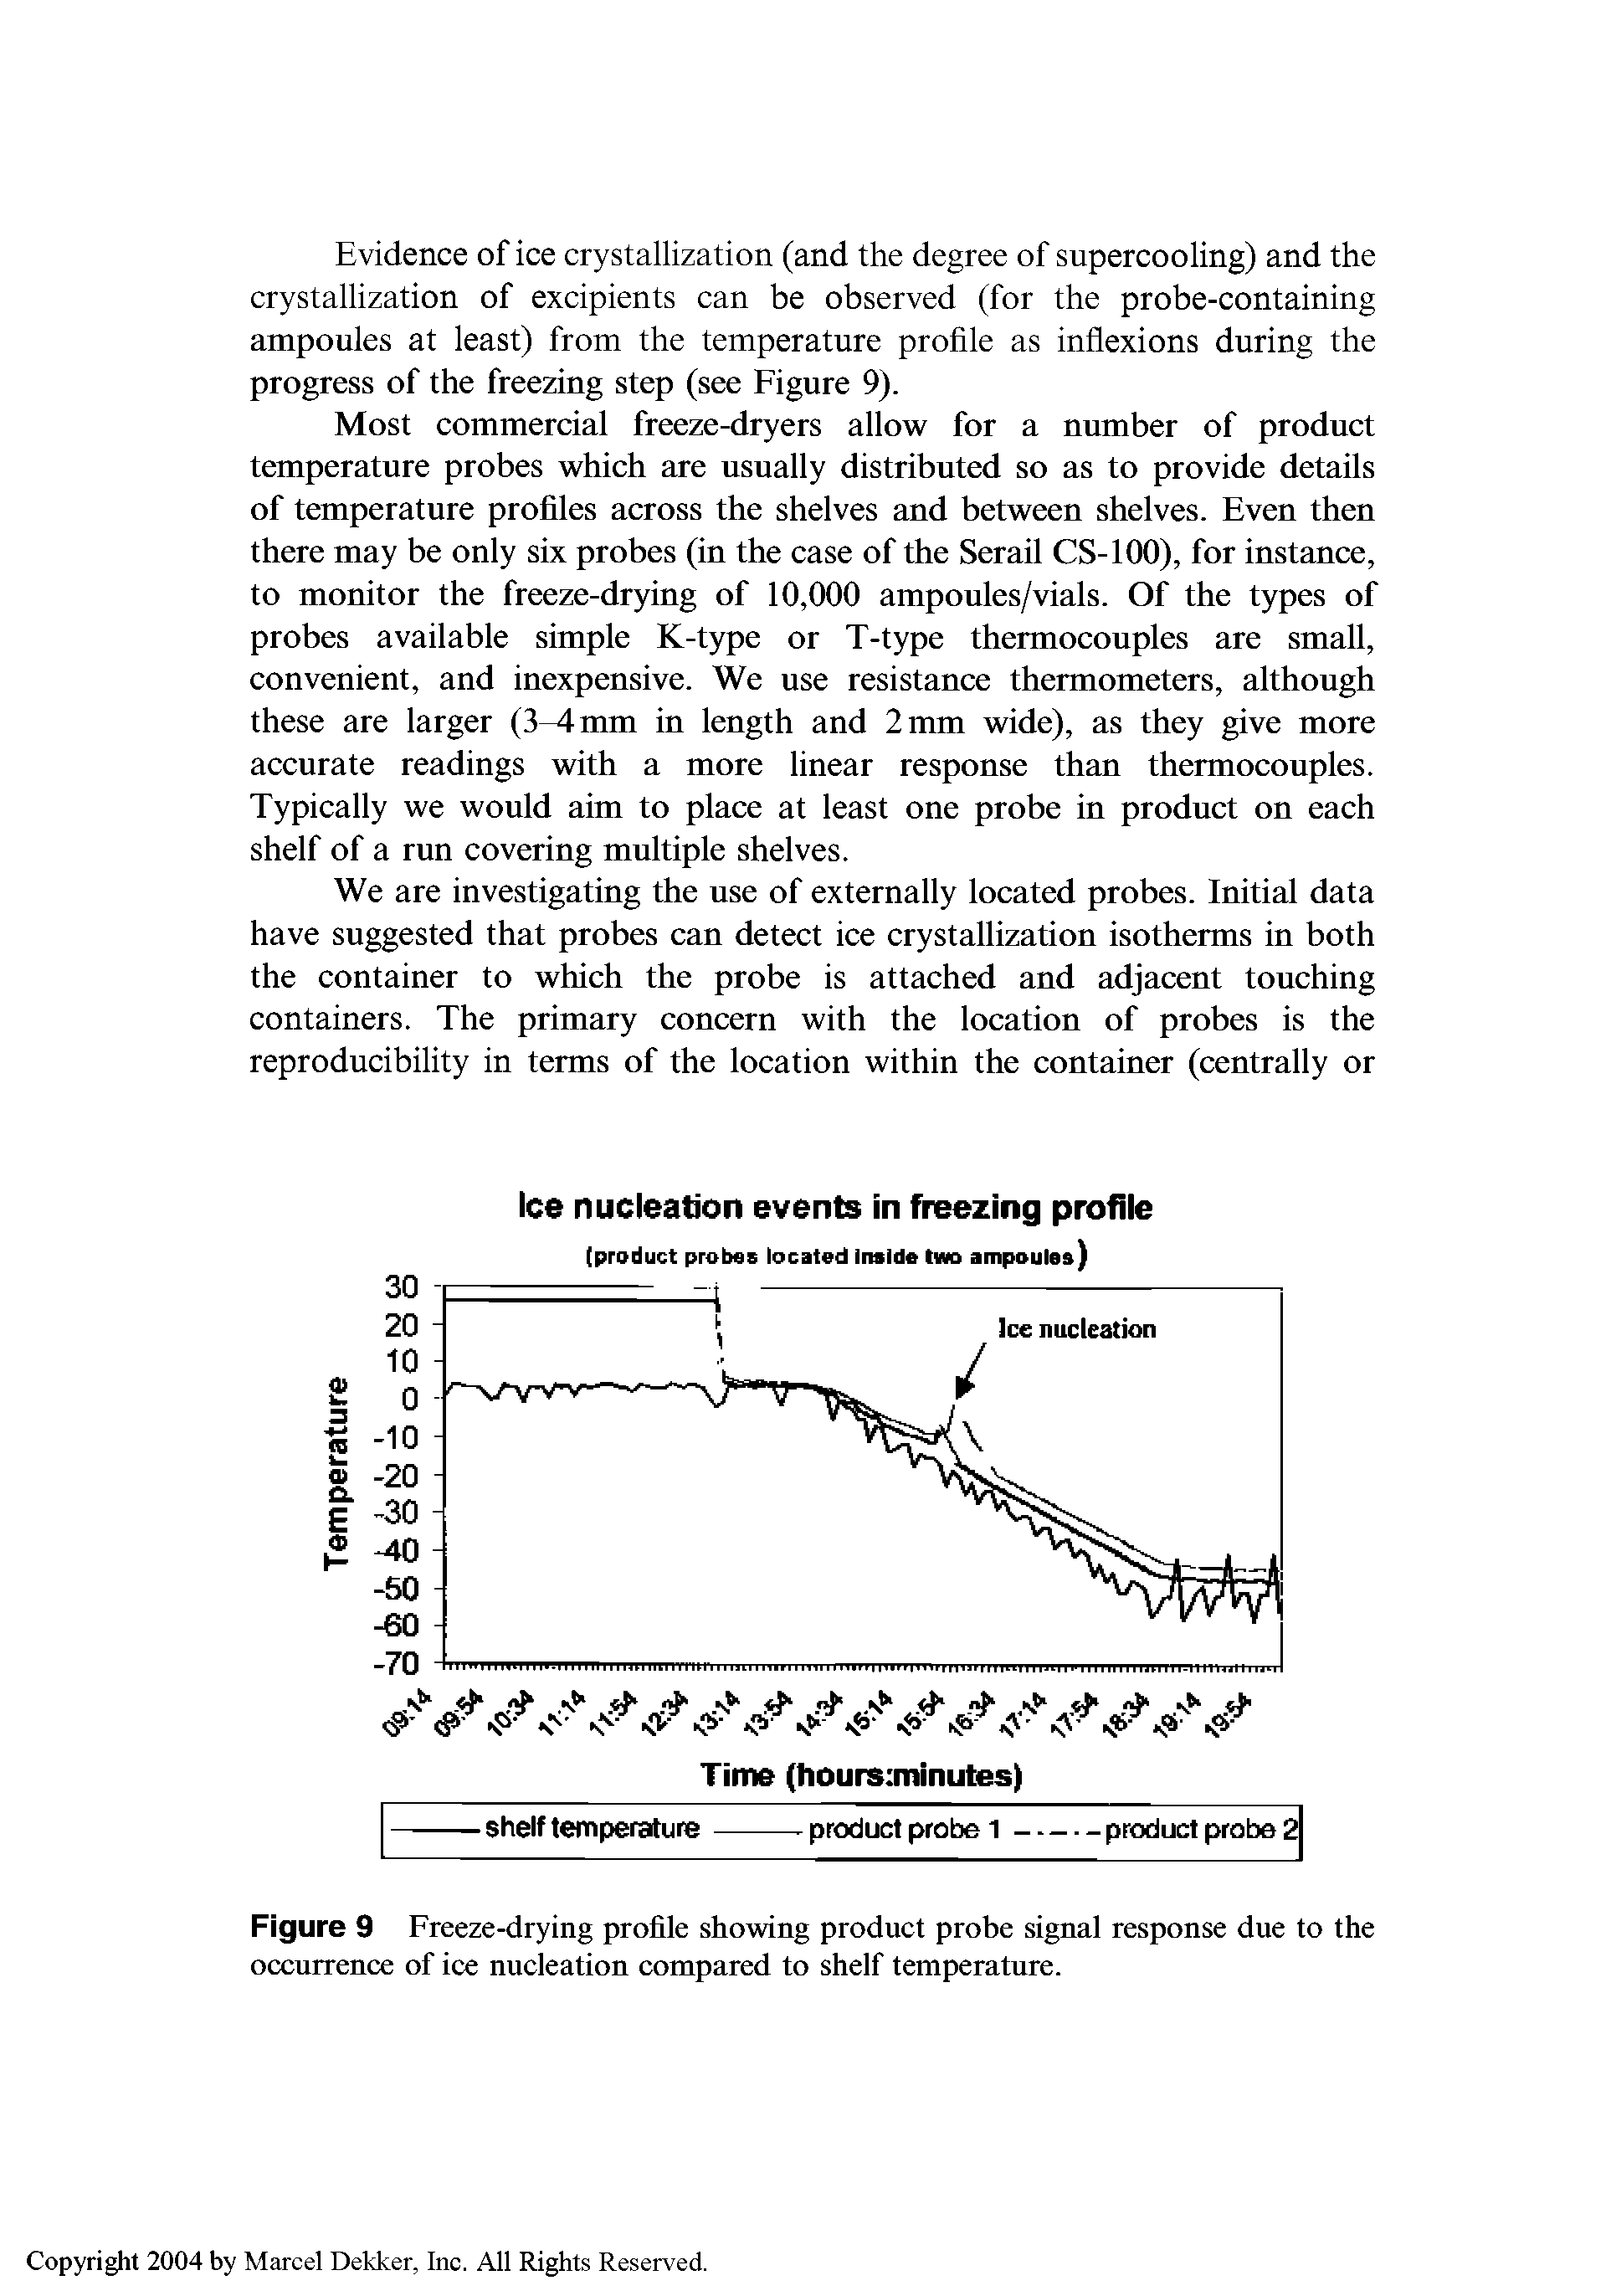 Figure 9 Freeze-drying profile showing product probe signal response due to the occurrence of ice nucleation compared to shelf temperature.